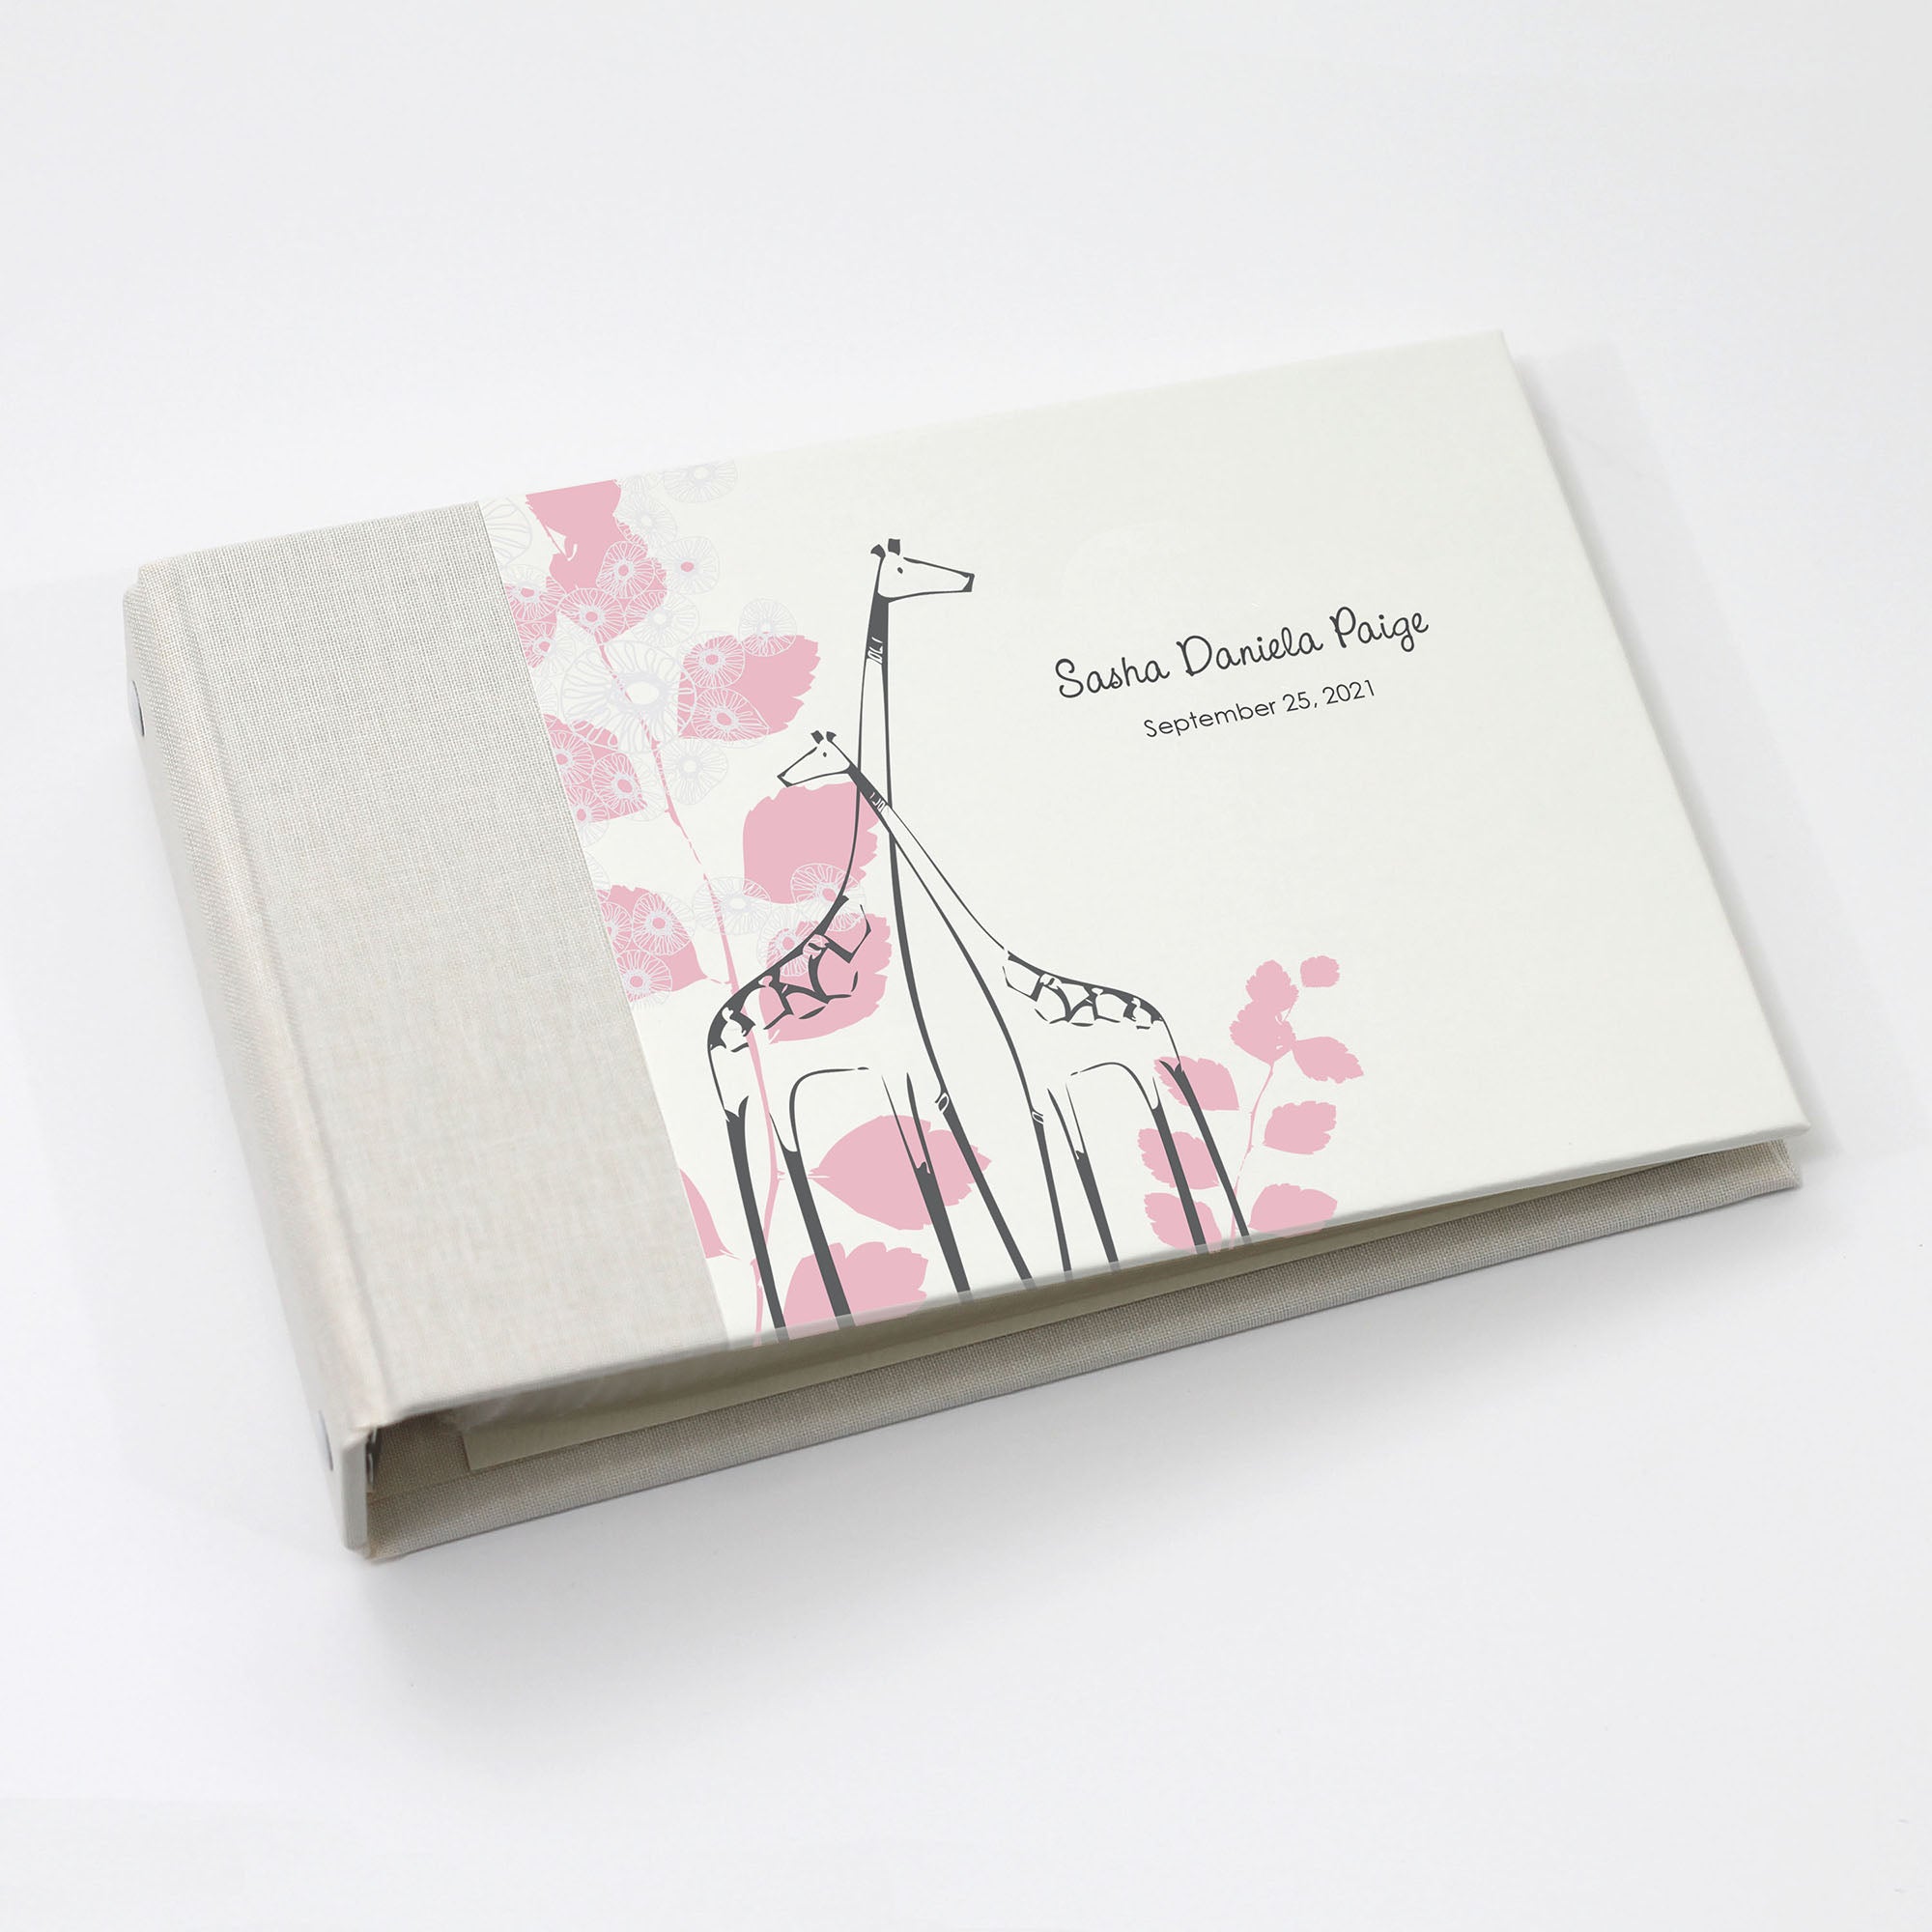 Your LOGO, Custom Recipe Card Binder, 4x6 Personalized with Your